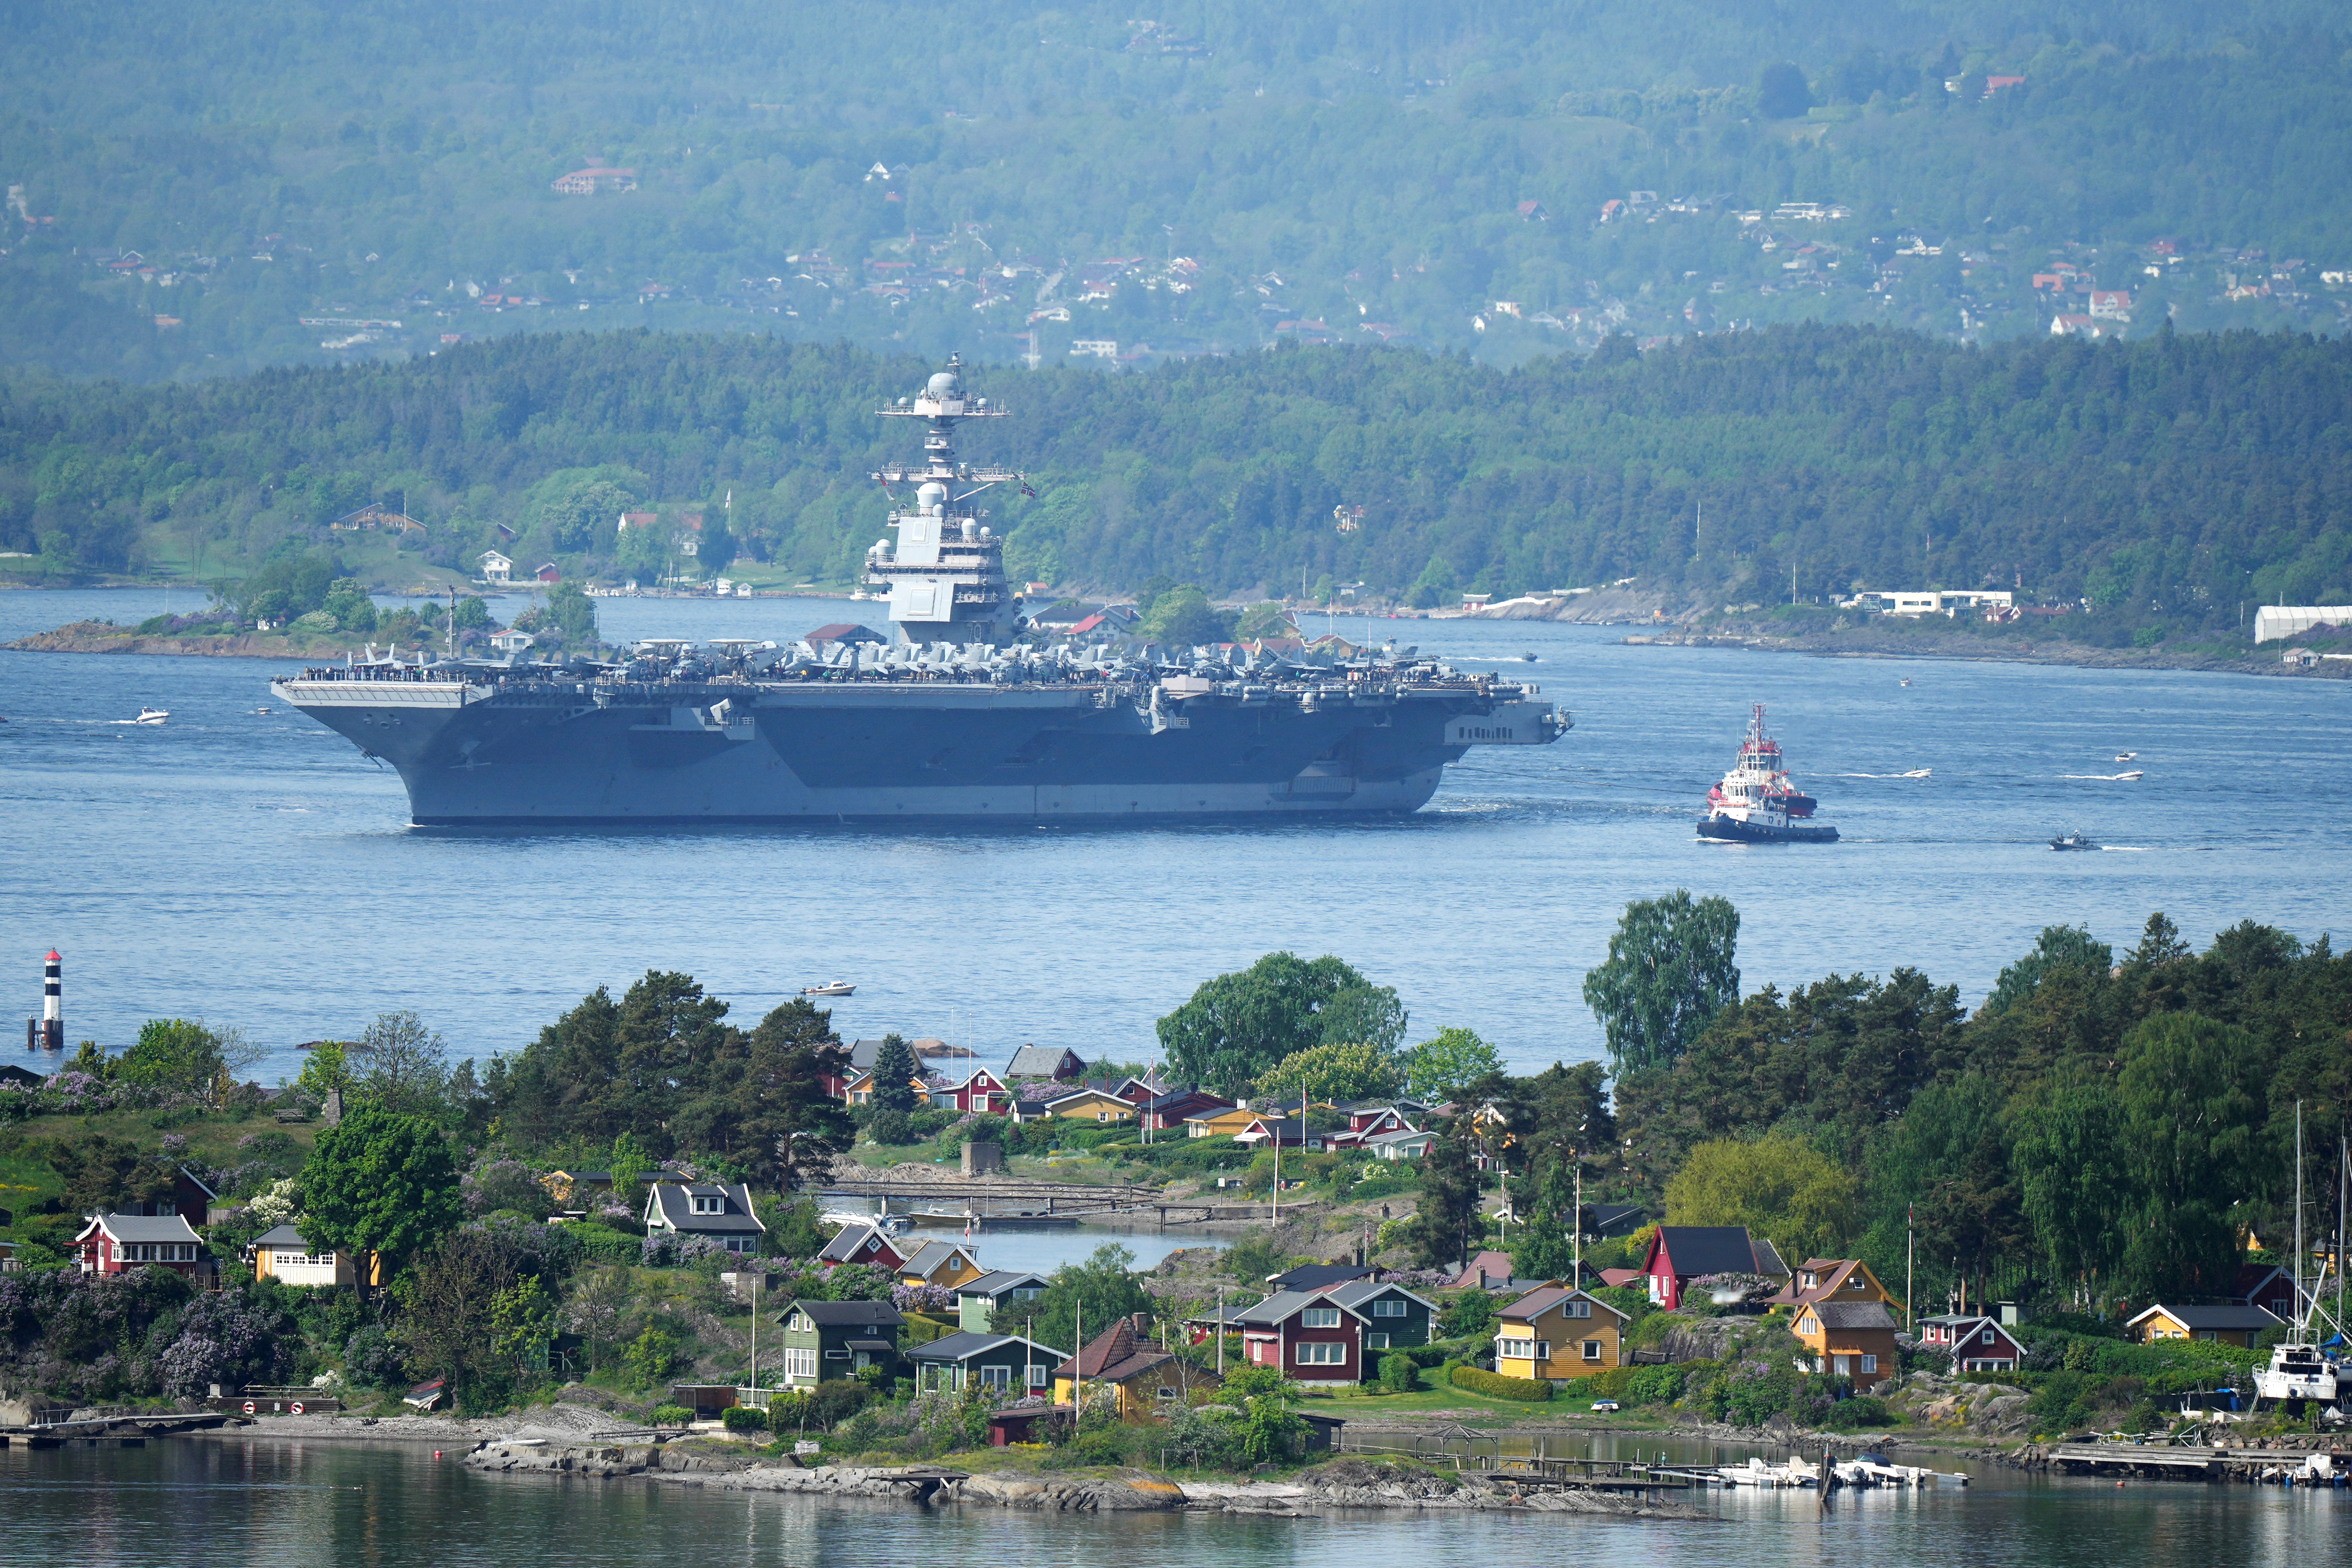 The aircraft carrier USS Gerald R. Ford in Oslo